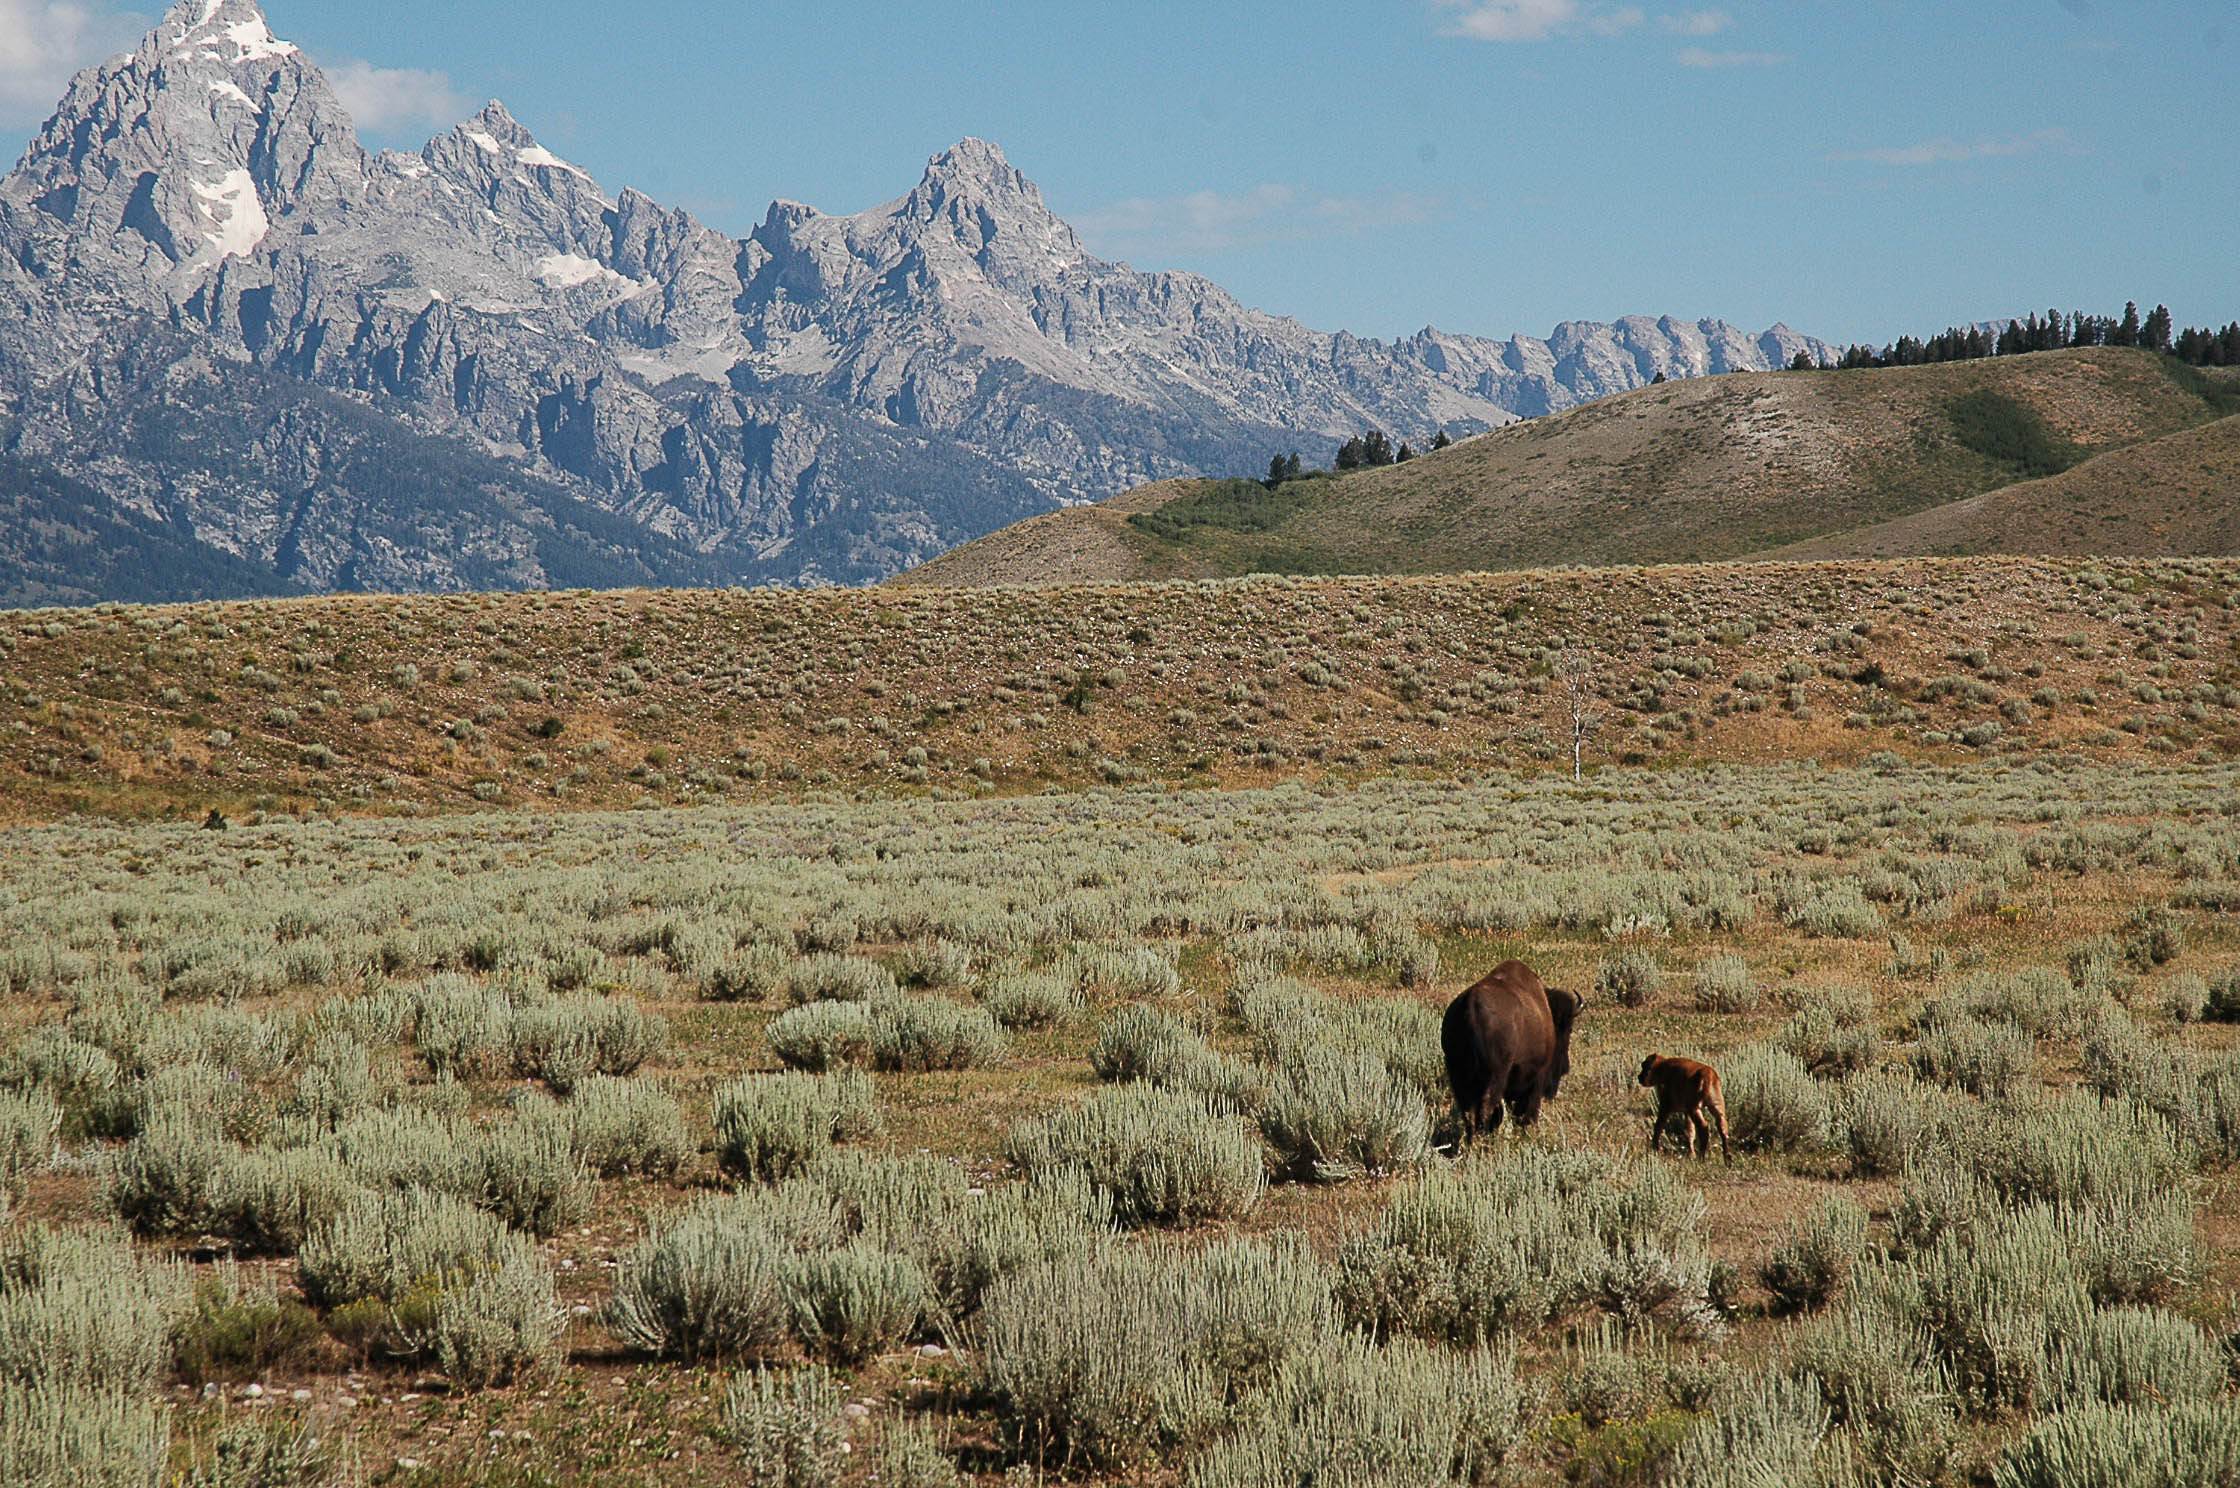 All the beautiful places. The Tetons